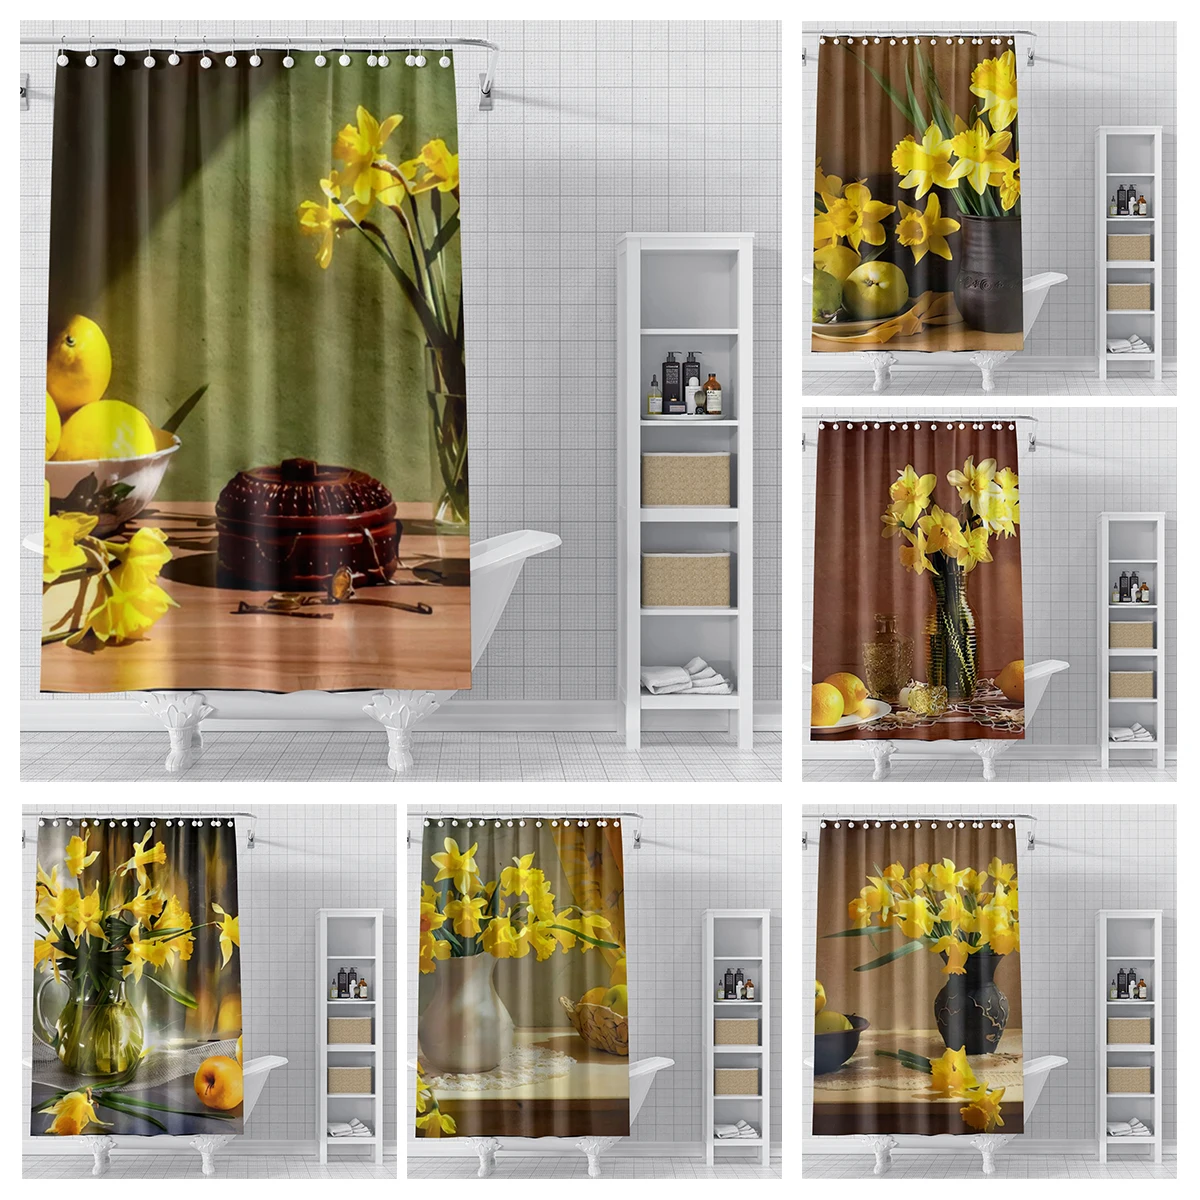 

home shower Oil painting style curtains for bathroom waterproof fabric bathroom Curtains modern shower curtain 180x200 240x200